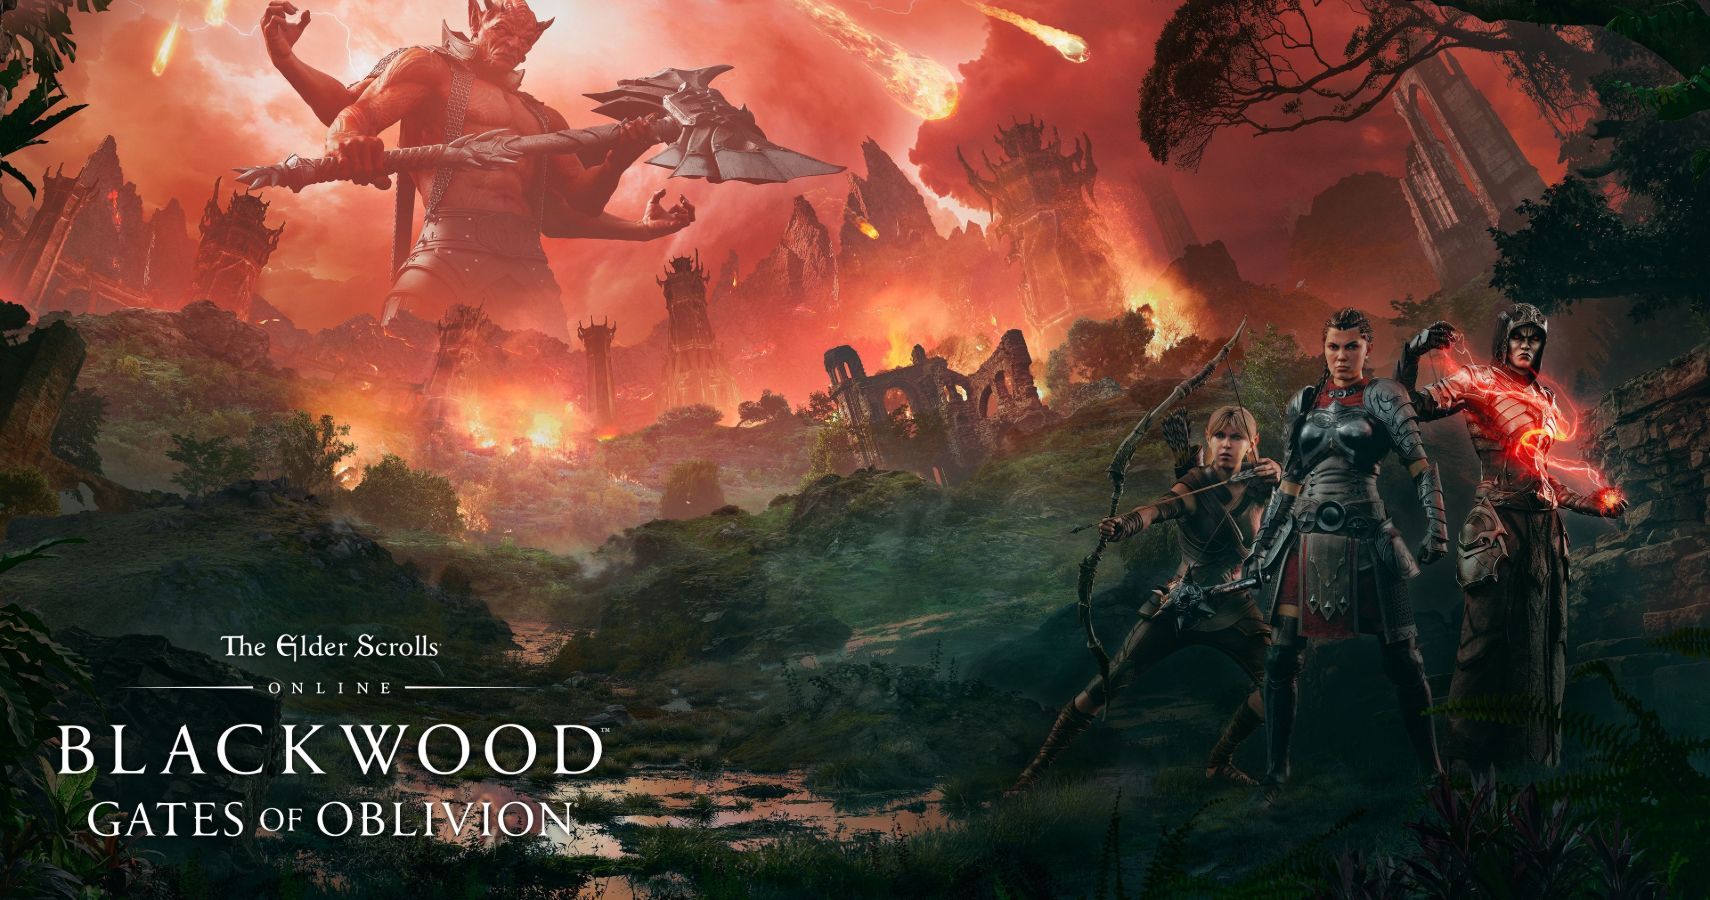 ESO Blackwood Trailer Takes A Closer Look At Content